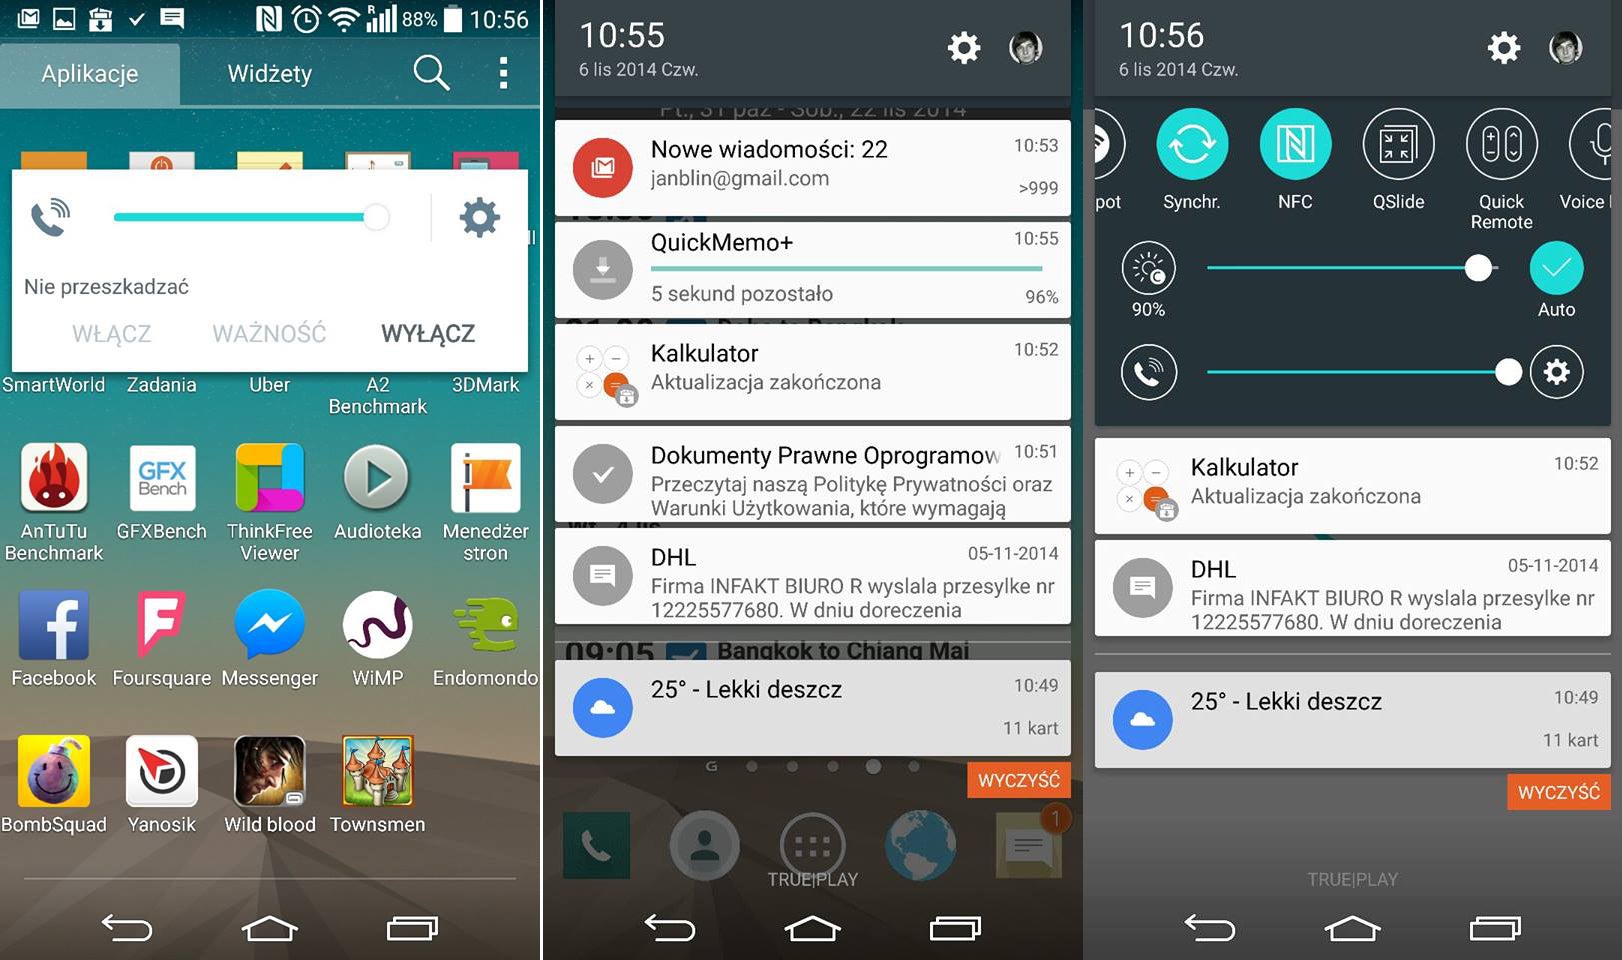 LG already hard at work on the Android 5.0 Lollipop update for the G3, leaked screenshots suggest